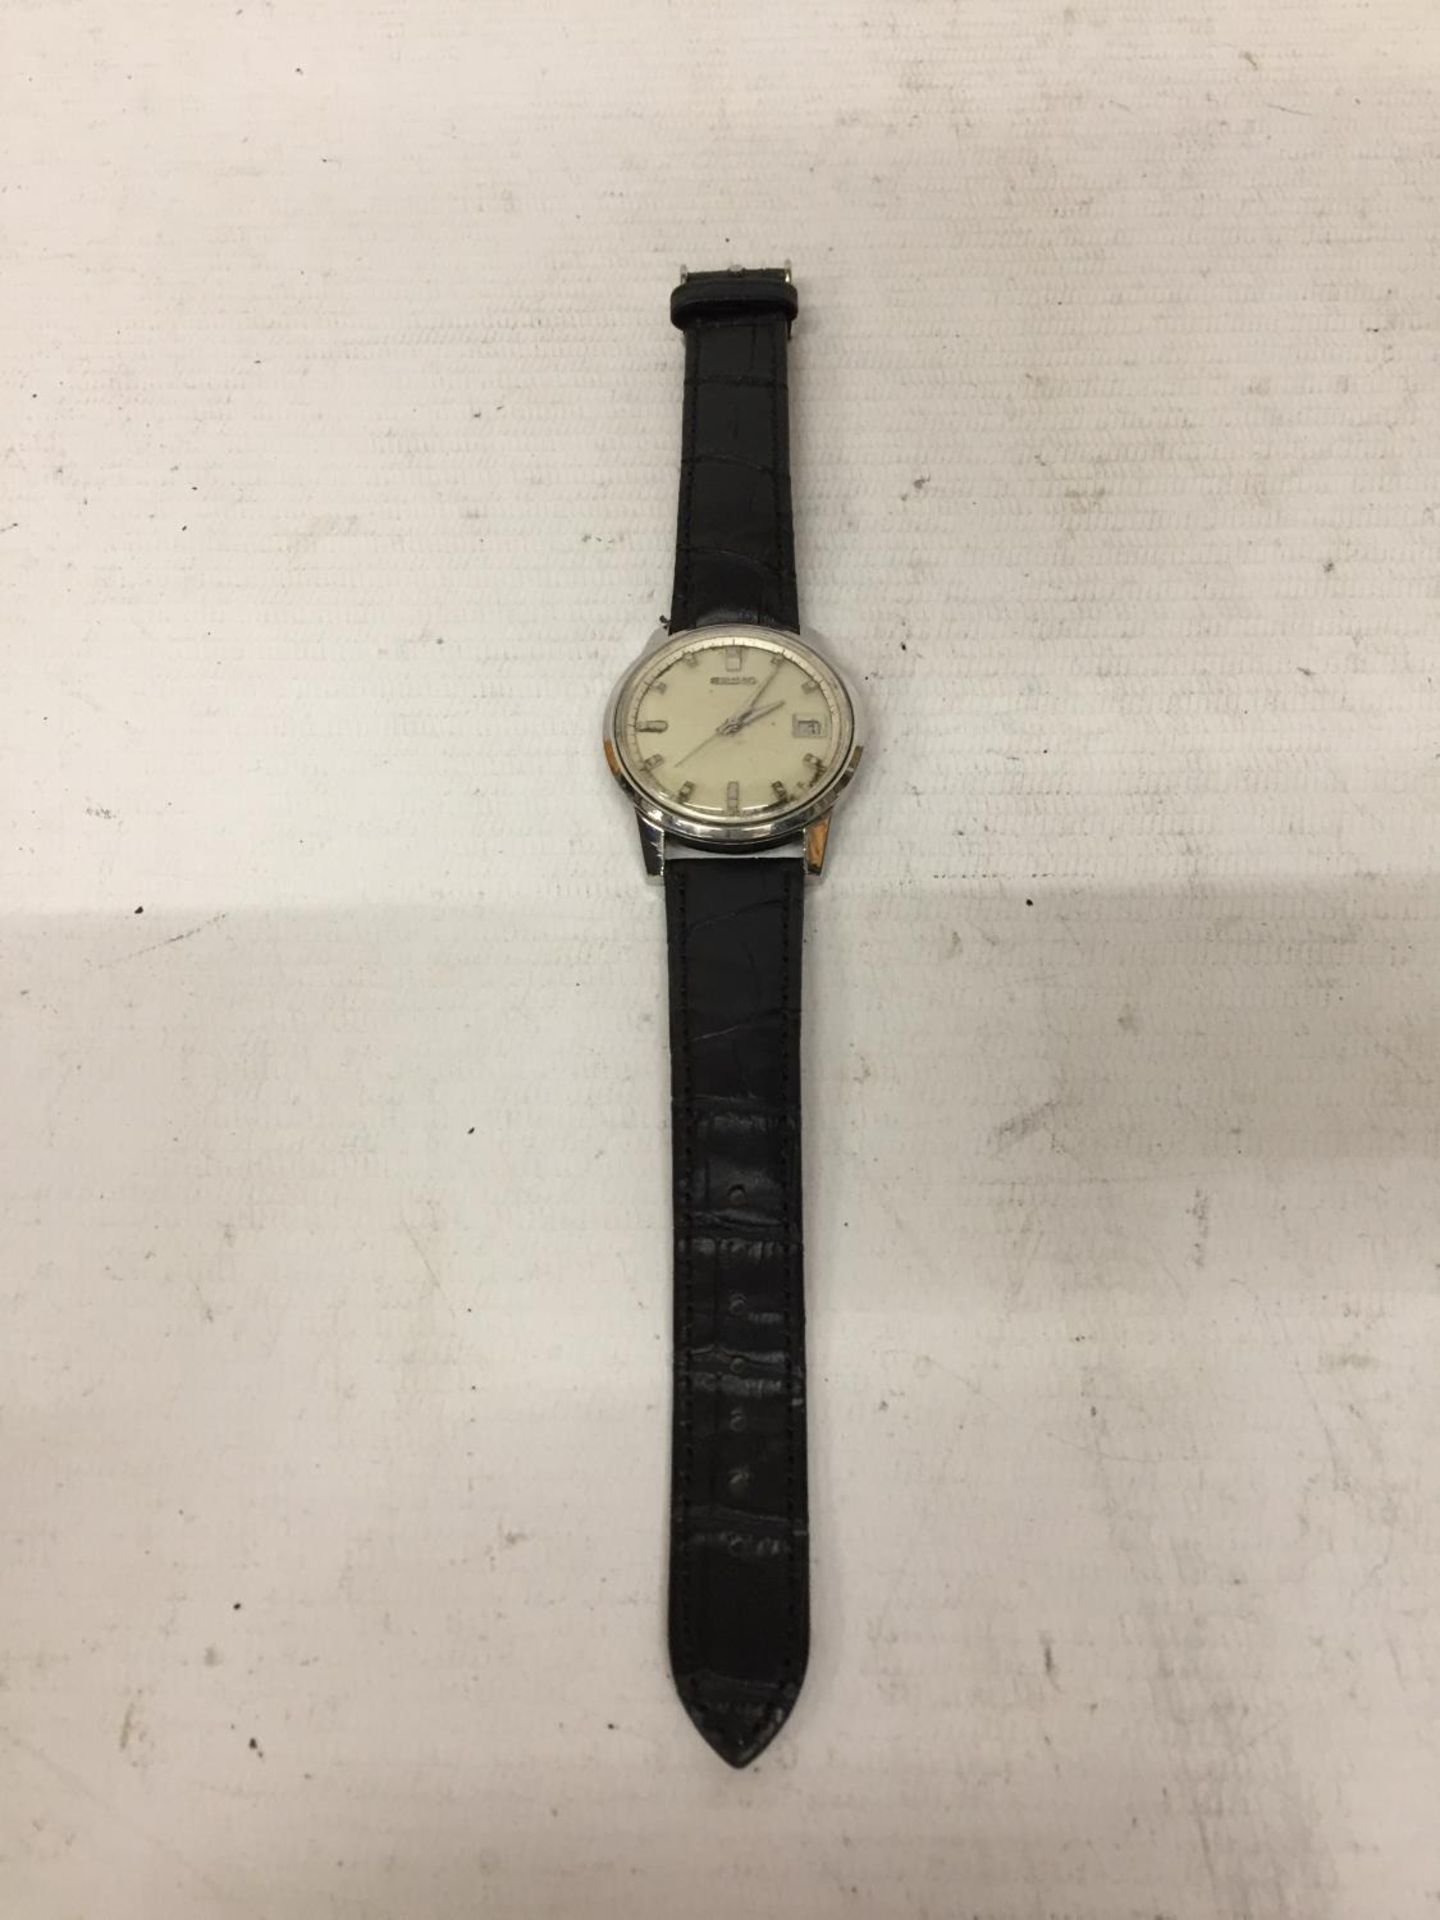 A VINTAGE SEIKO SPORTSMATIC AUTOMATIC WRISTWATCH 7625-8060 SEEN WORKING BUT NO WARRANTY